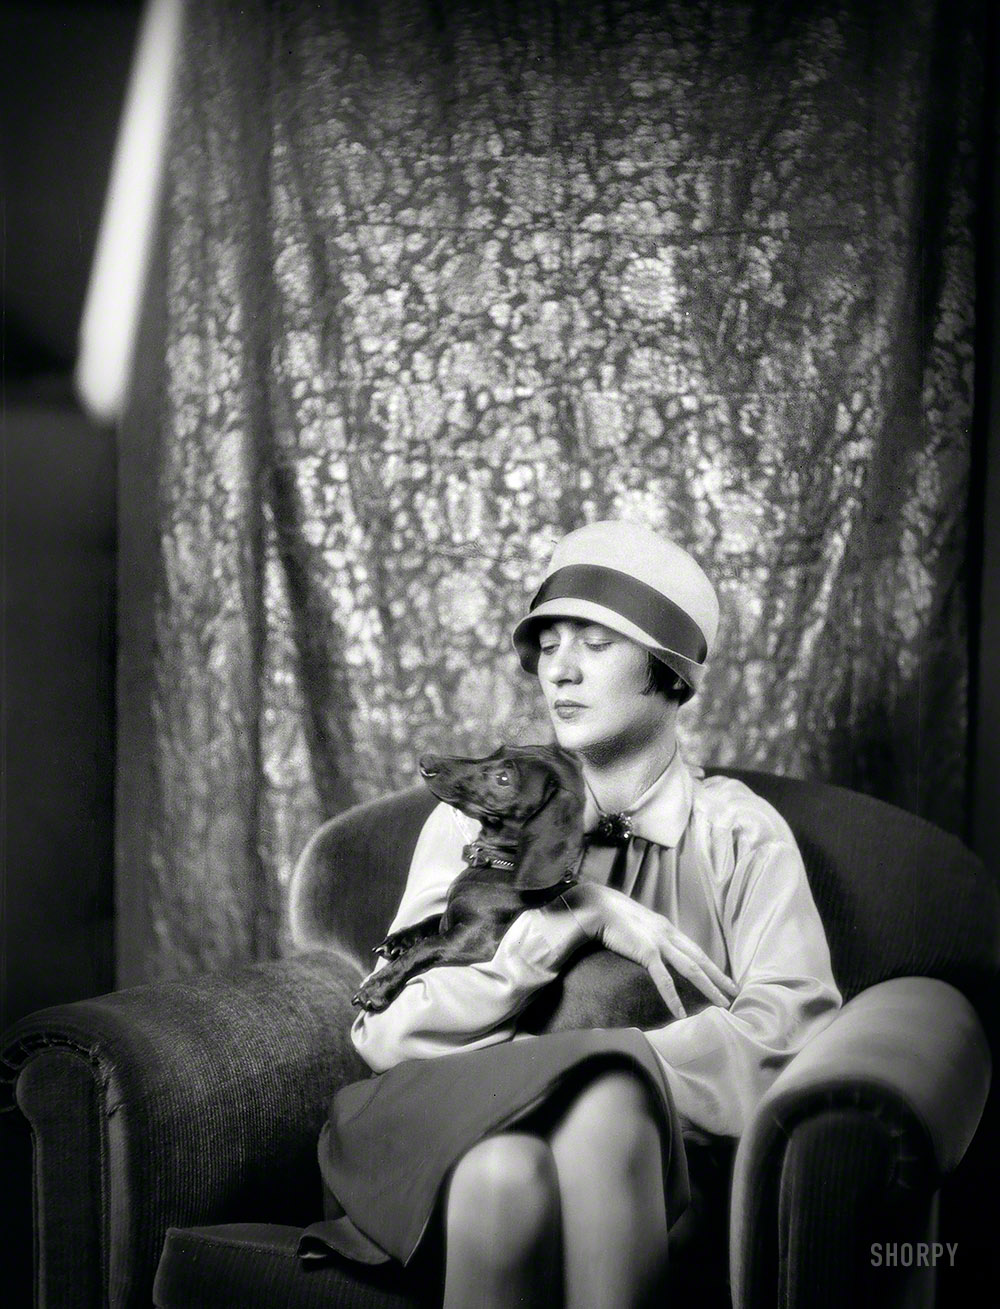 October 18, 1926. "Goldbeck, Walter, Mrs., with dog. 1 West 66th Street, New York City." 4x5 nitrate negative by Arnold Genthe. View full size.